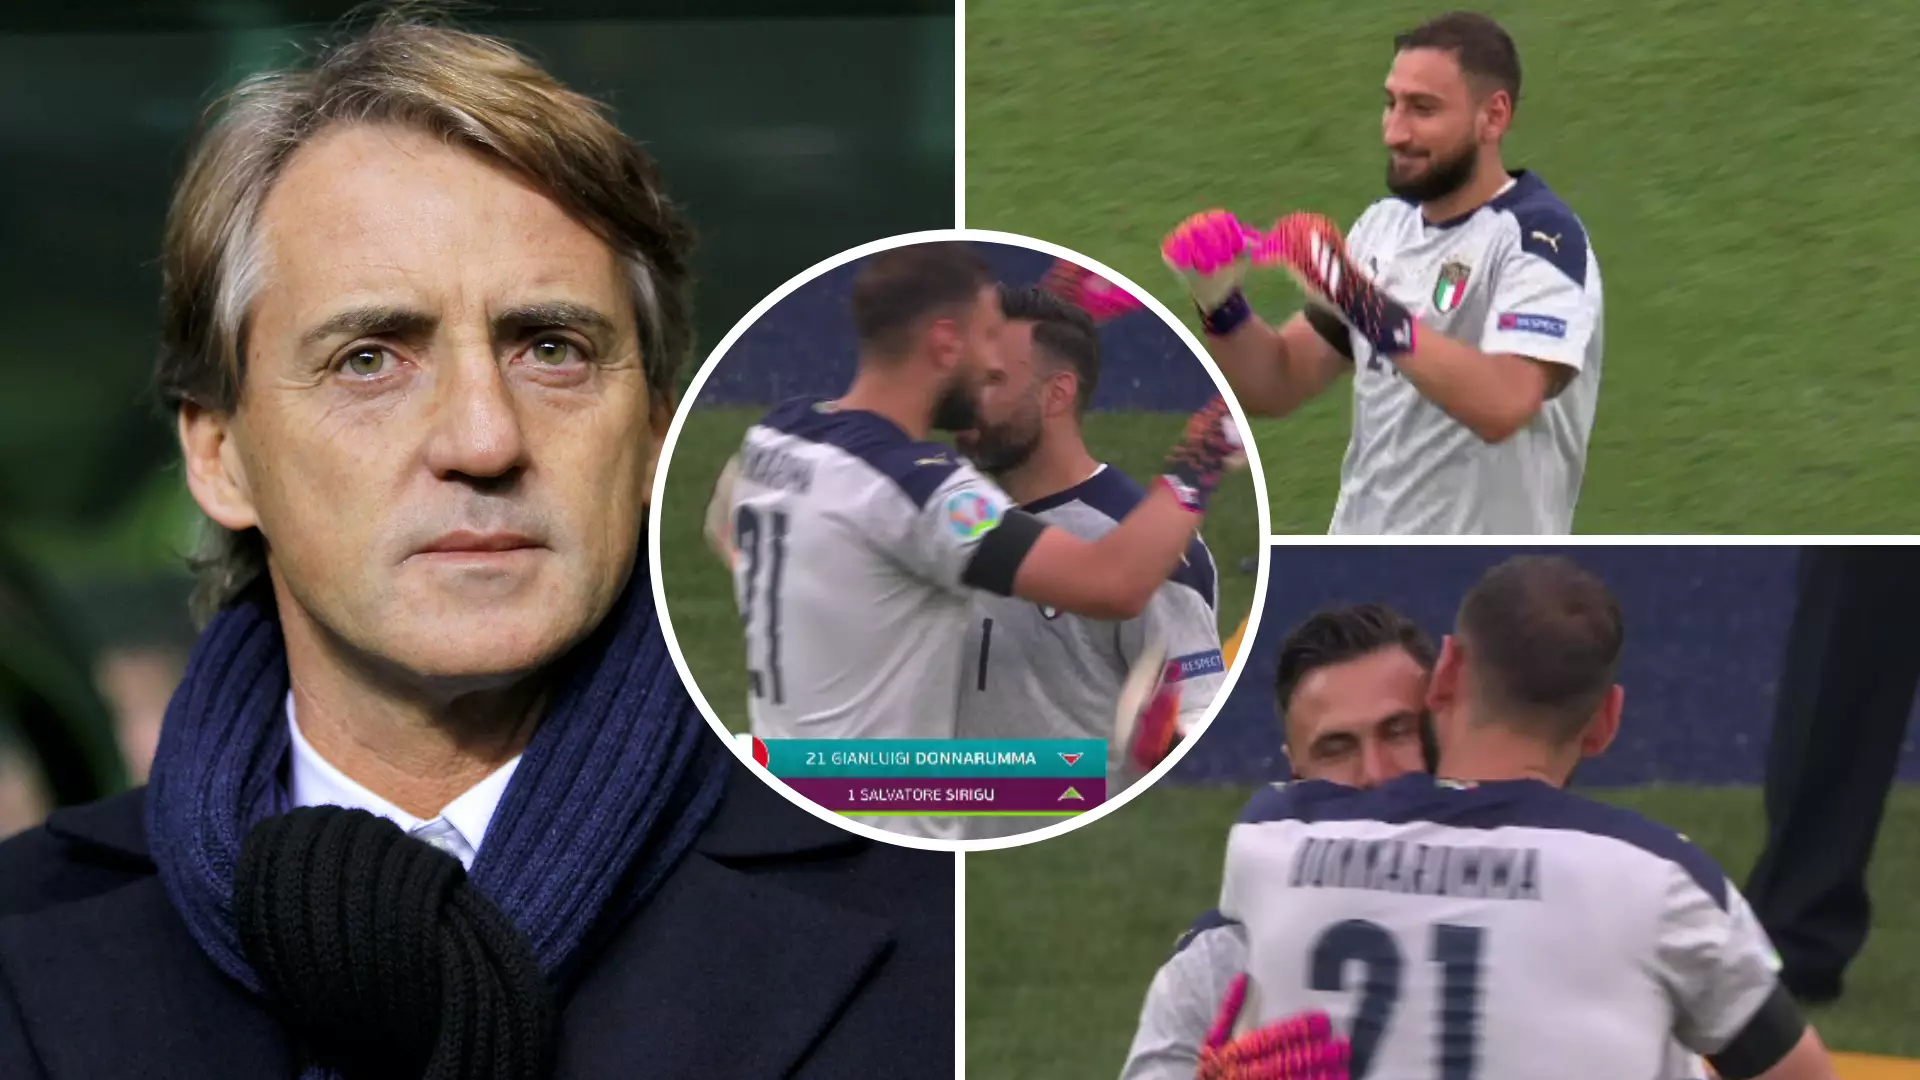 Roberto Mancini Is 'Having A Laugh' After Subbing Off Gianluigi Donnarumma In 89th Minute vs Wales